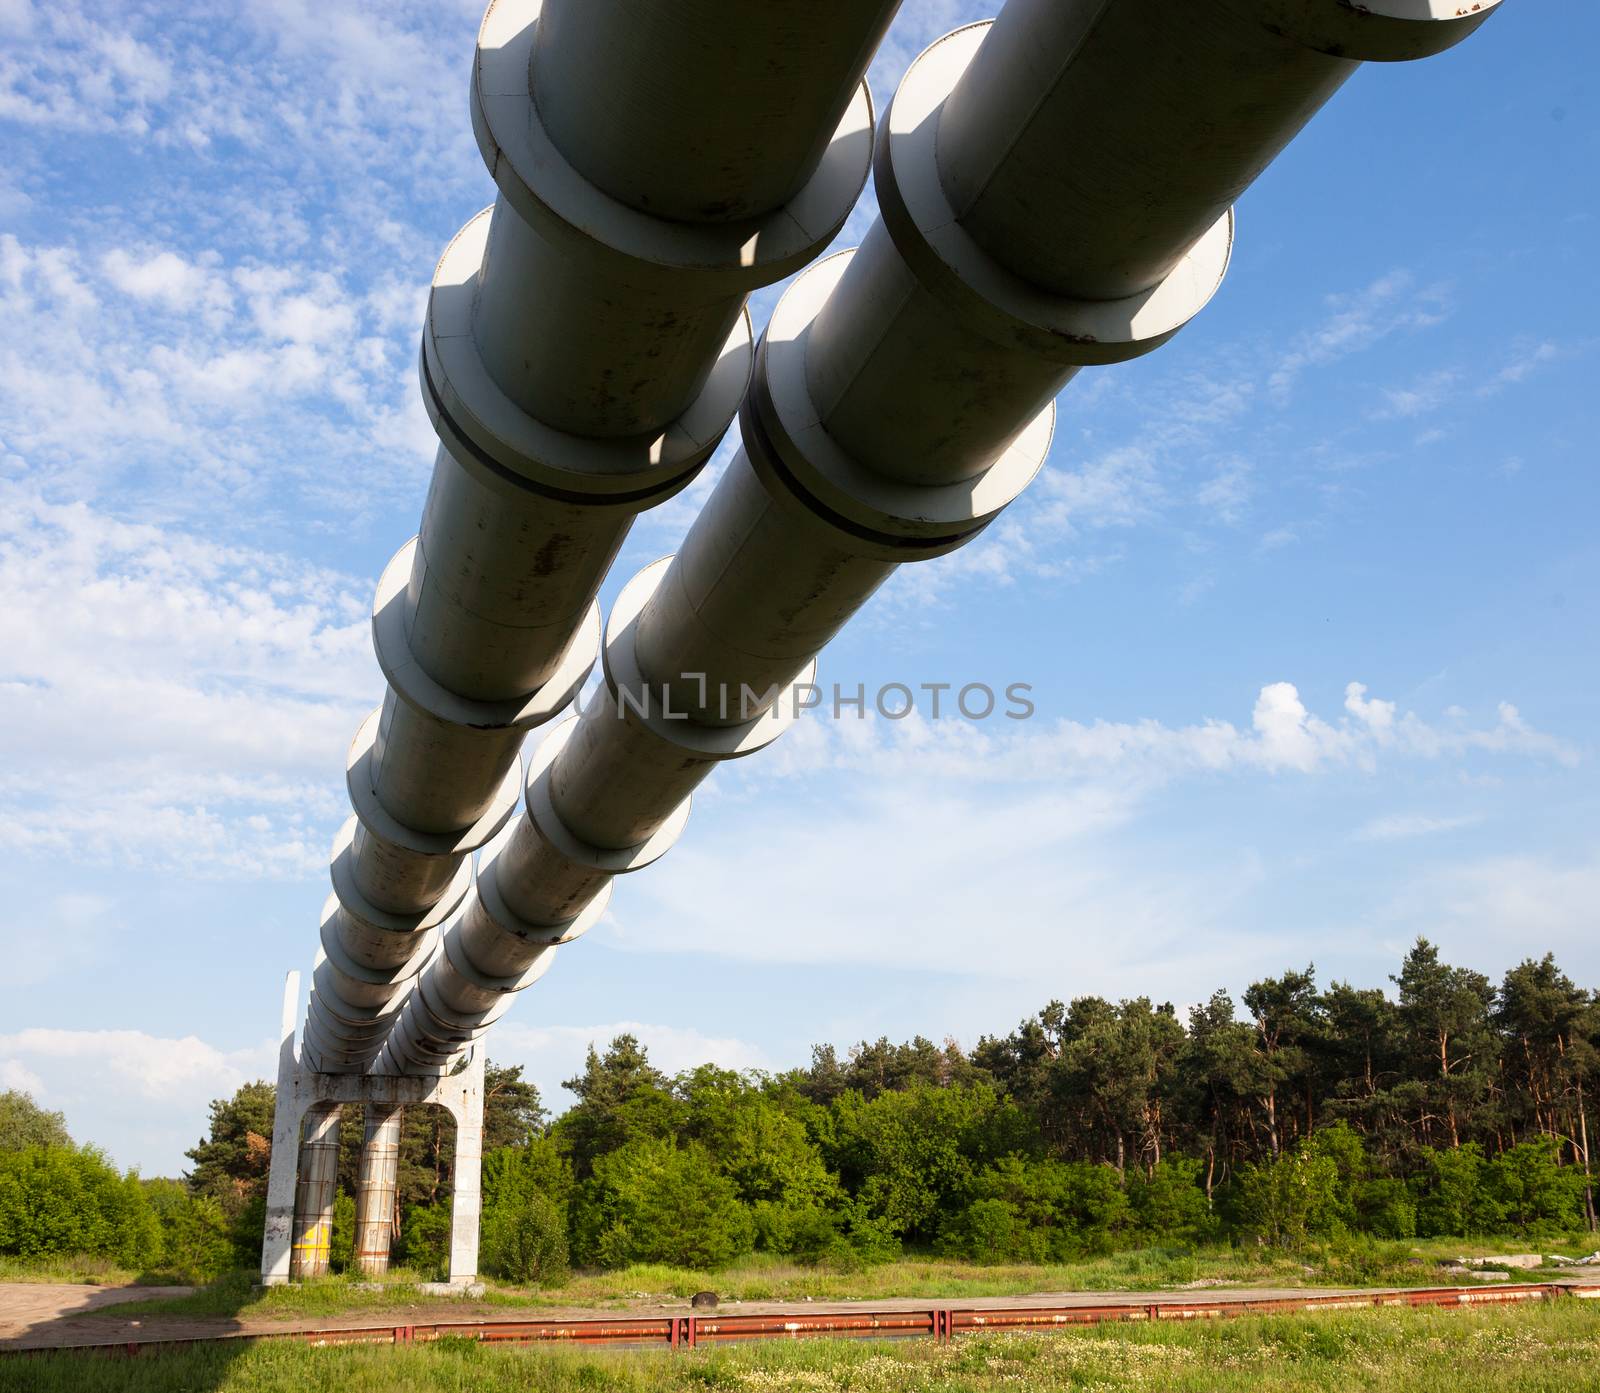 Elevated section of the pipelines against the sky